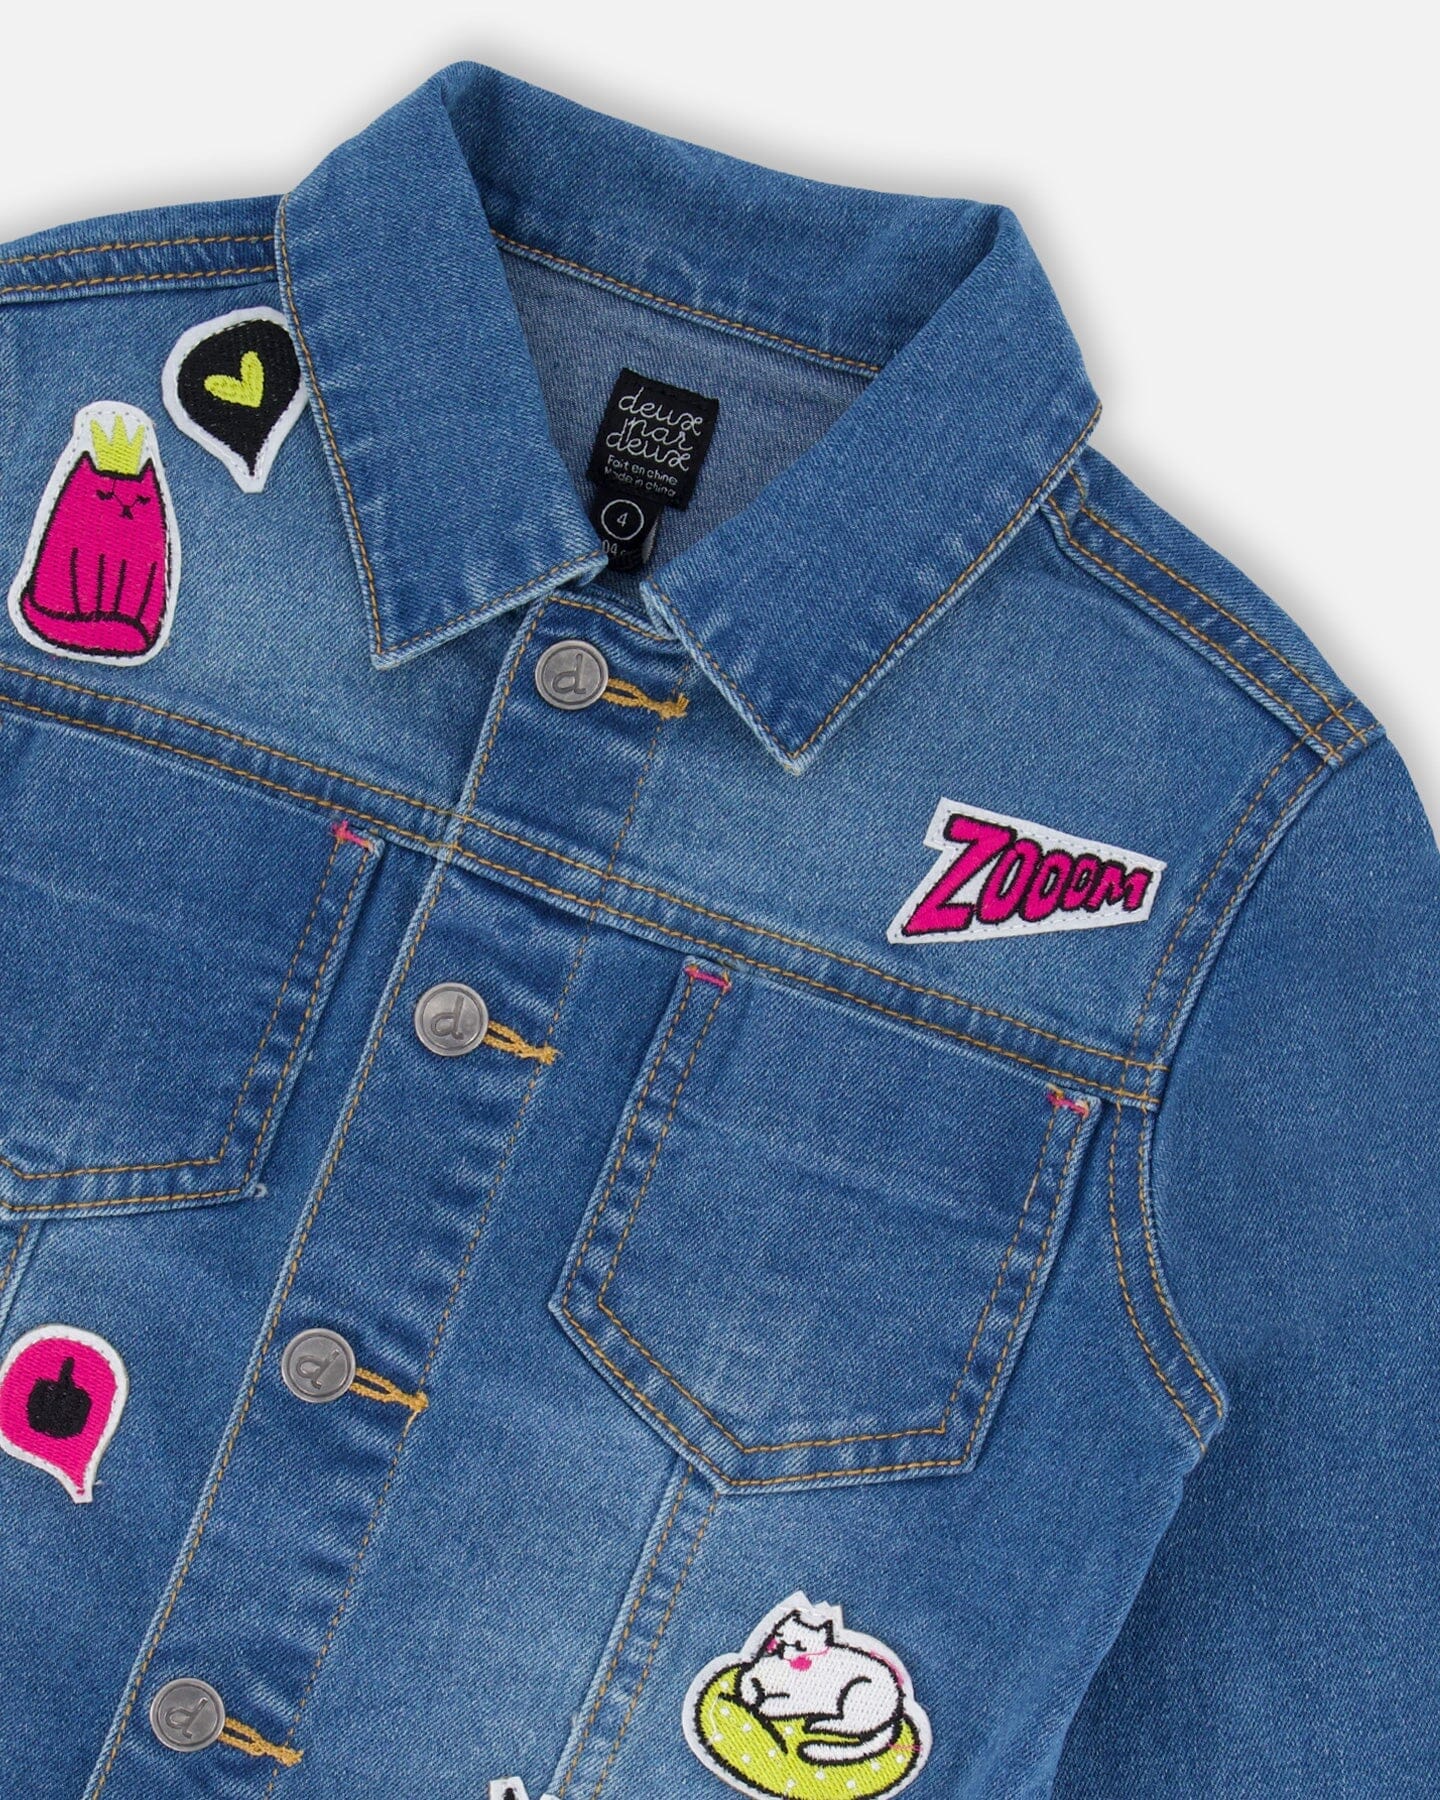 Jean Jacket With Funny Patches - F30L50_123